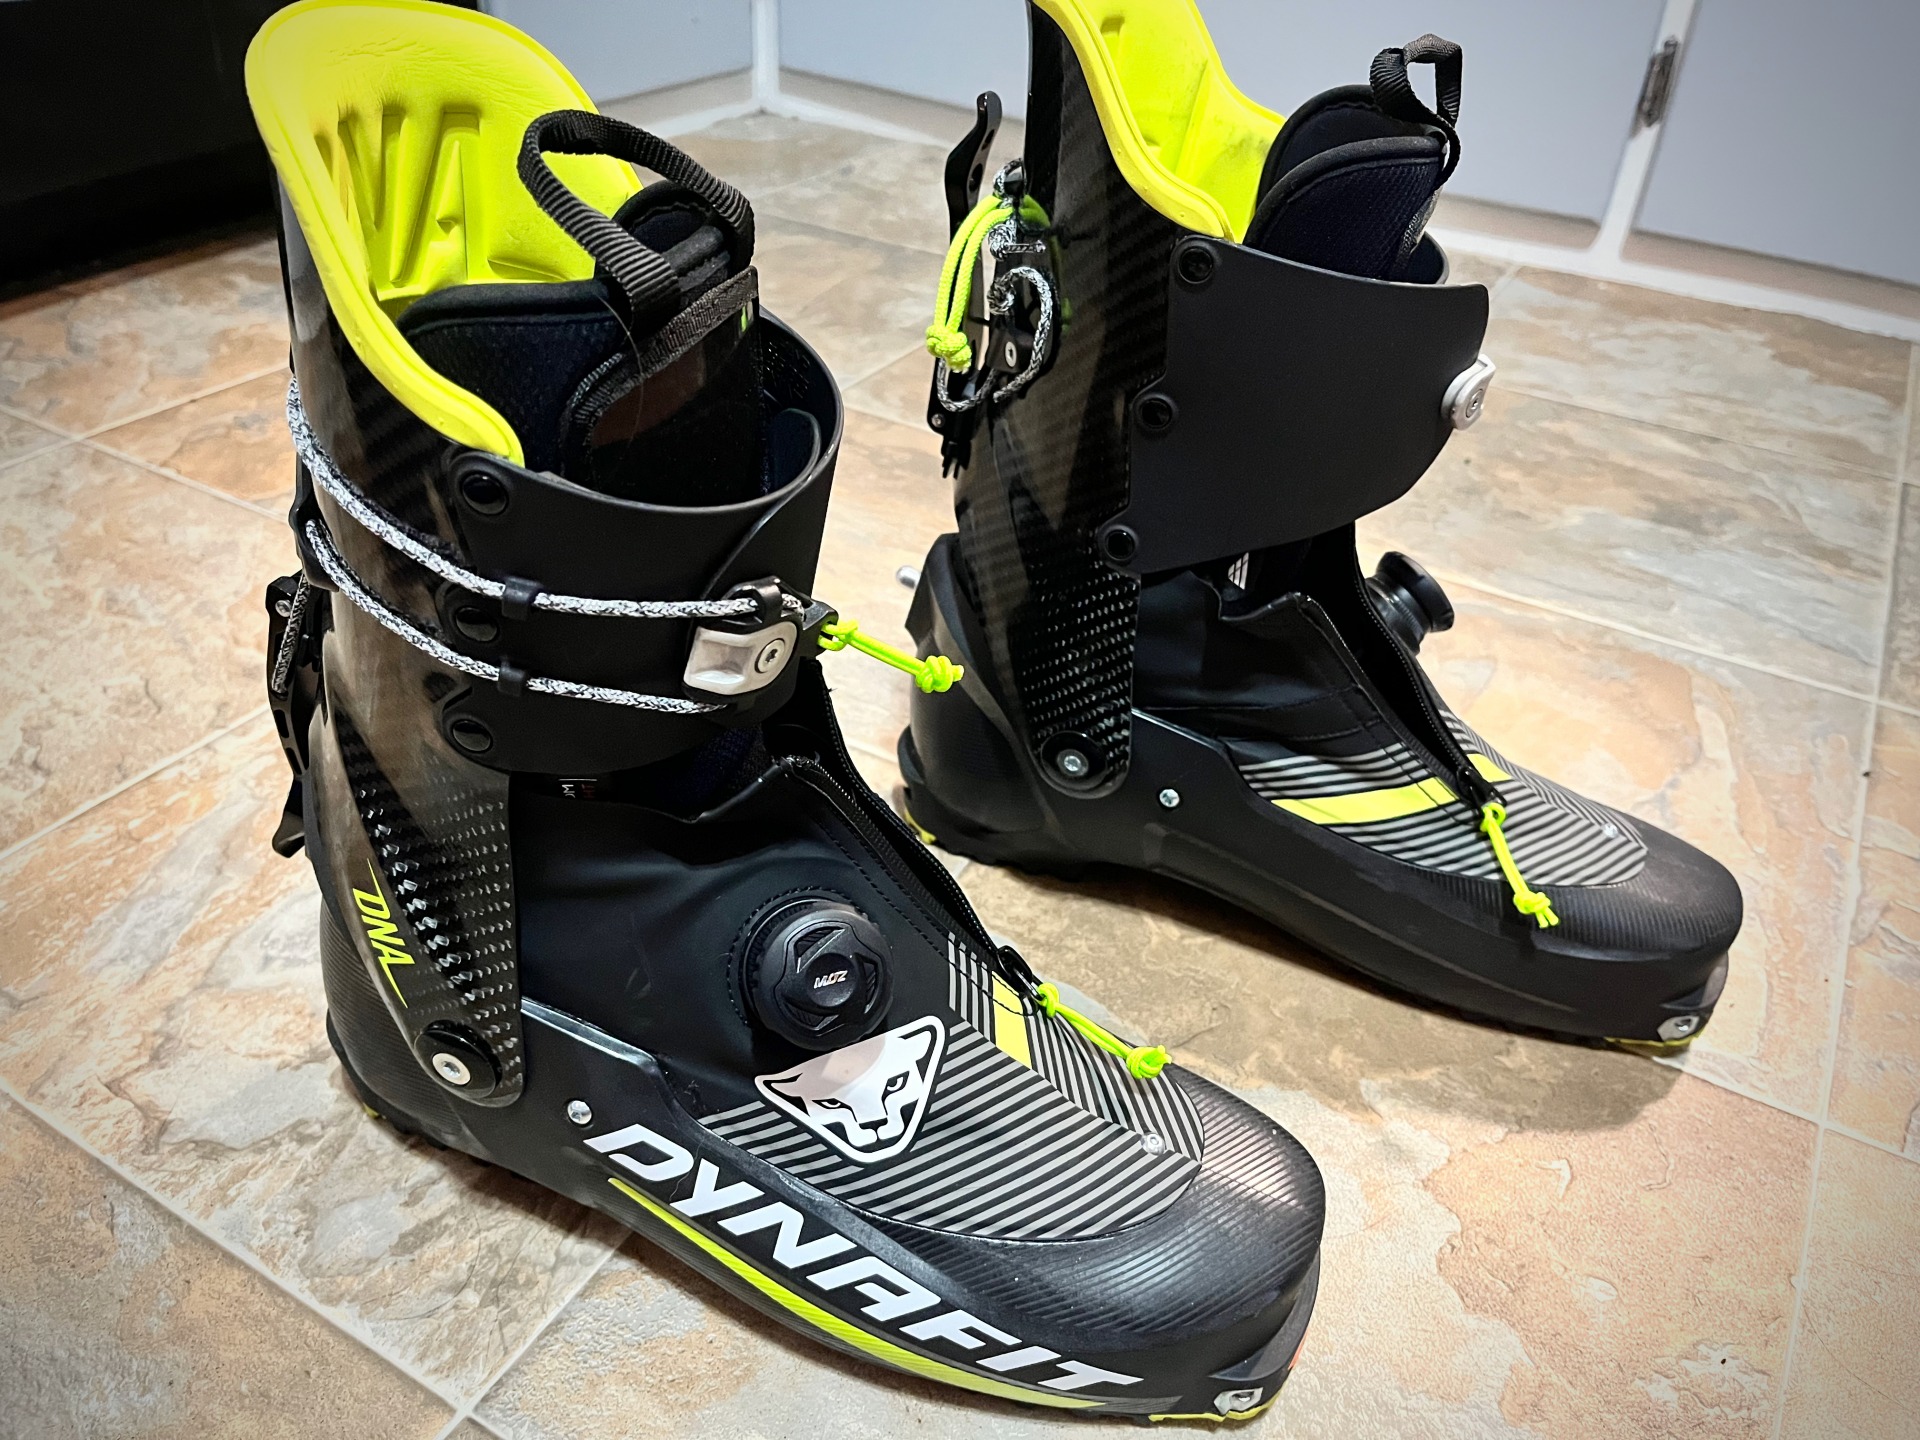 Dynafit DNA Race Boot: A First Look - The Backcountry Ski Touring Blog